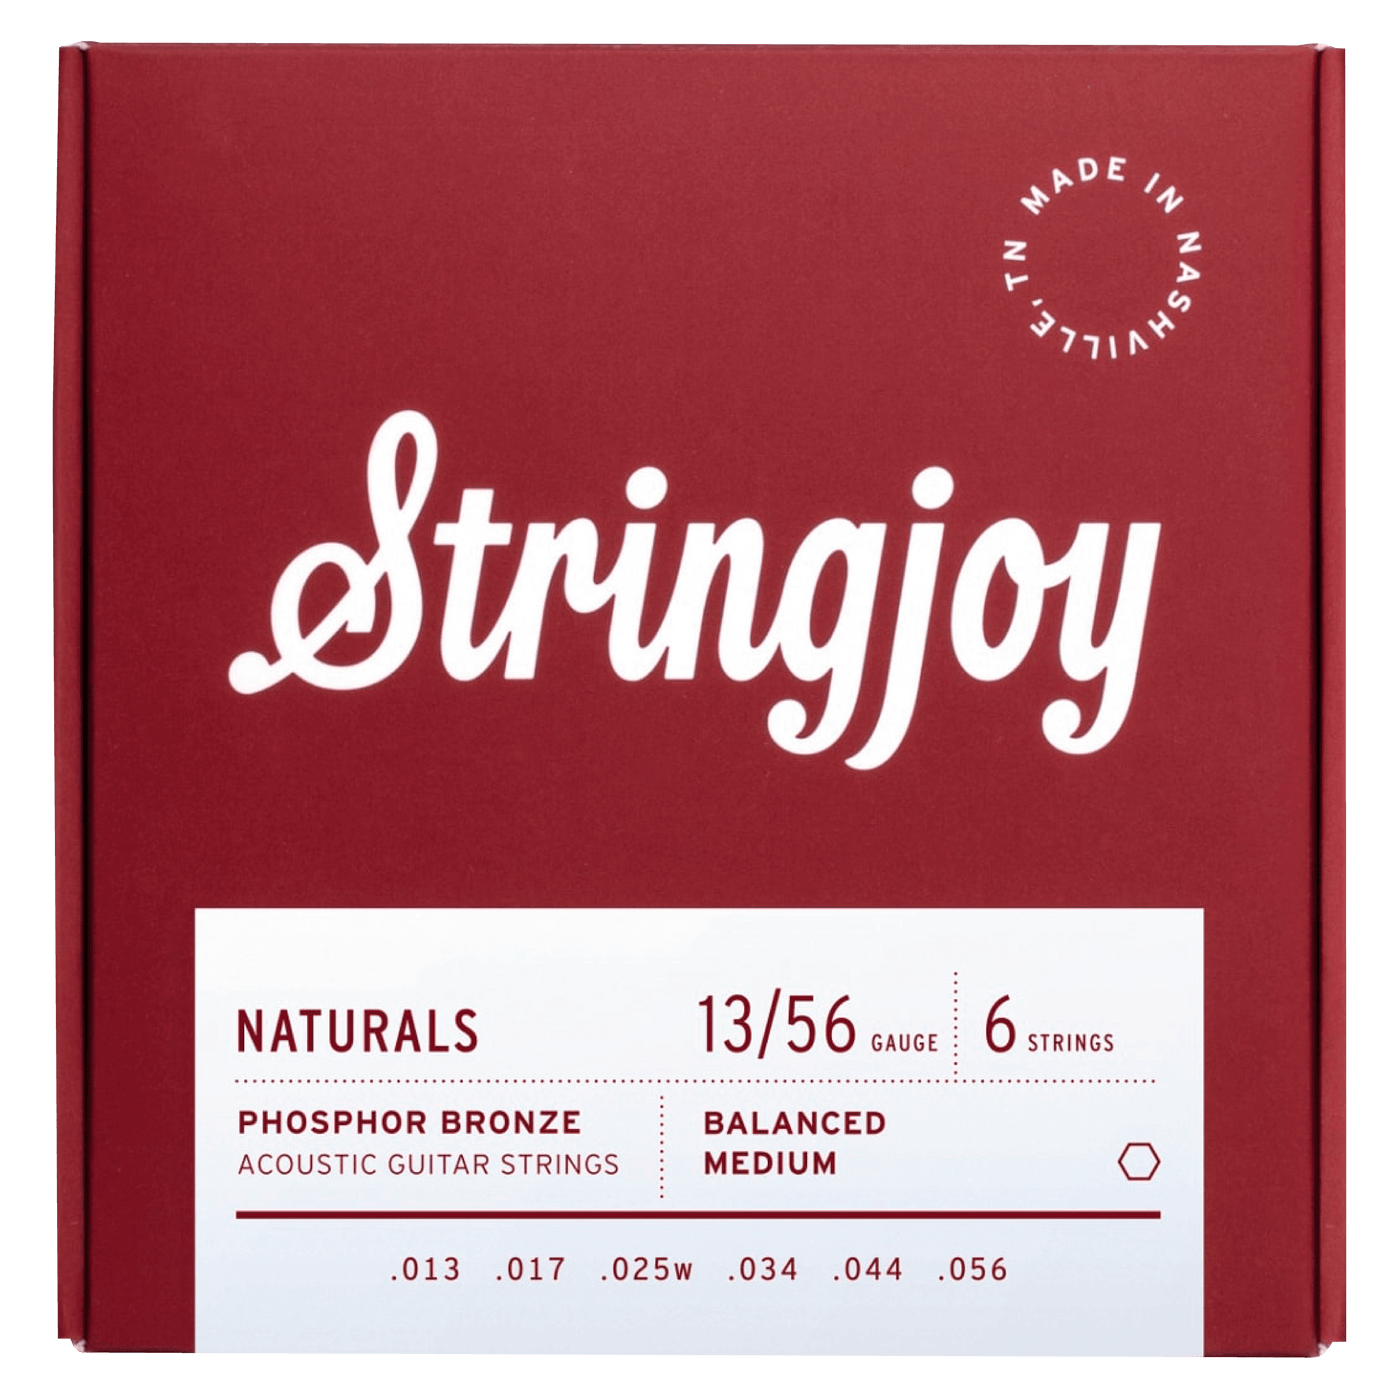 Stringjoy - Naturals Medium (13-56) - $19990 - Gearhub - Our Medium gauge set is the go-to string for players who want a big, warm, beefy tone out of their guitar that will project with plenty of volume and definition. Pair that with the powerful low end of our Naturals, and you’ve basically wrapped yourself up in a blanket of tone so warm you could sleep outside in the Alaskan wilderness in the middle of winter. Take that hypothermia!. Naturals are our take on Phosphor Bronze, which is great at bringing ou